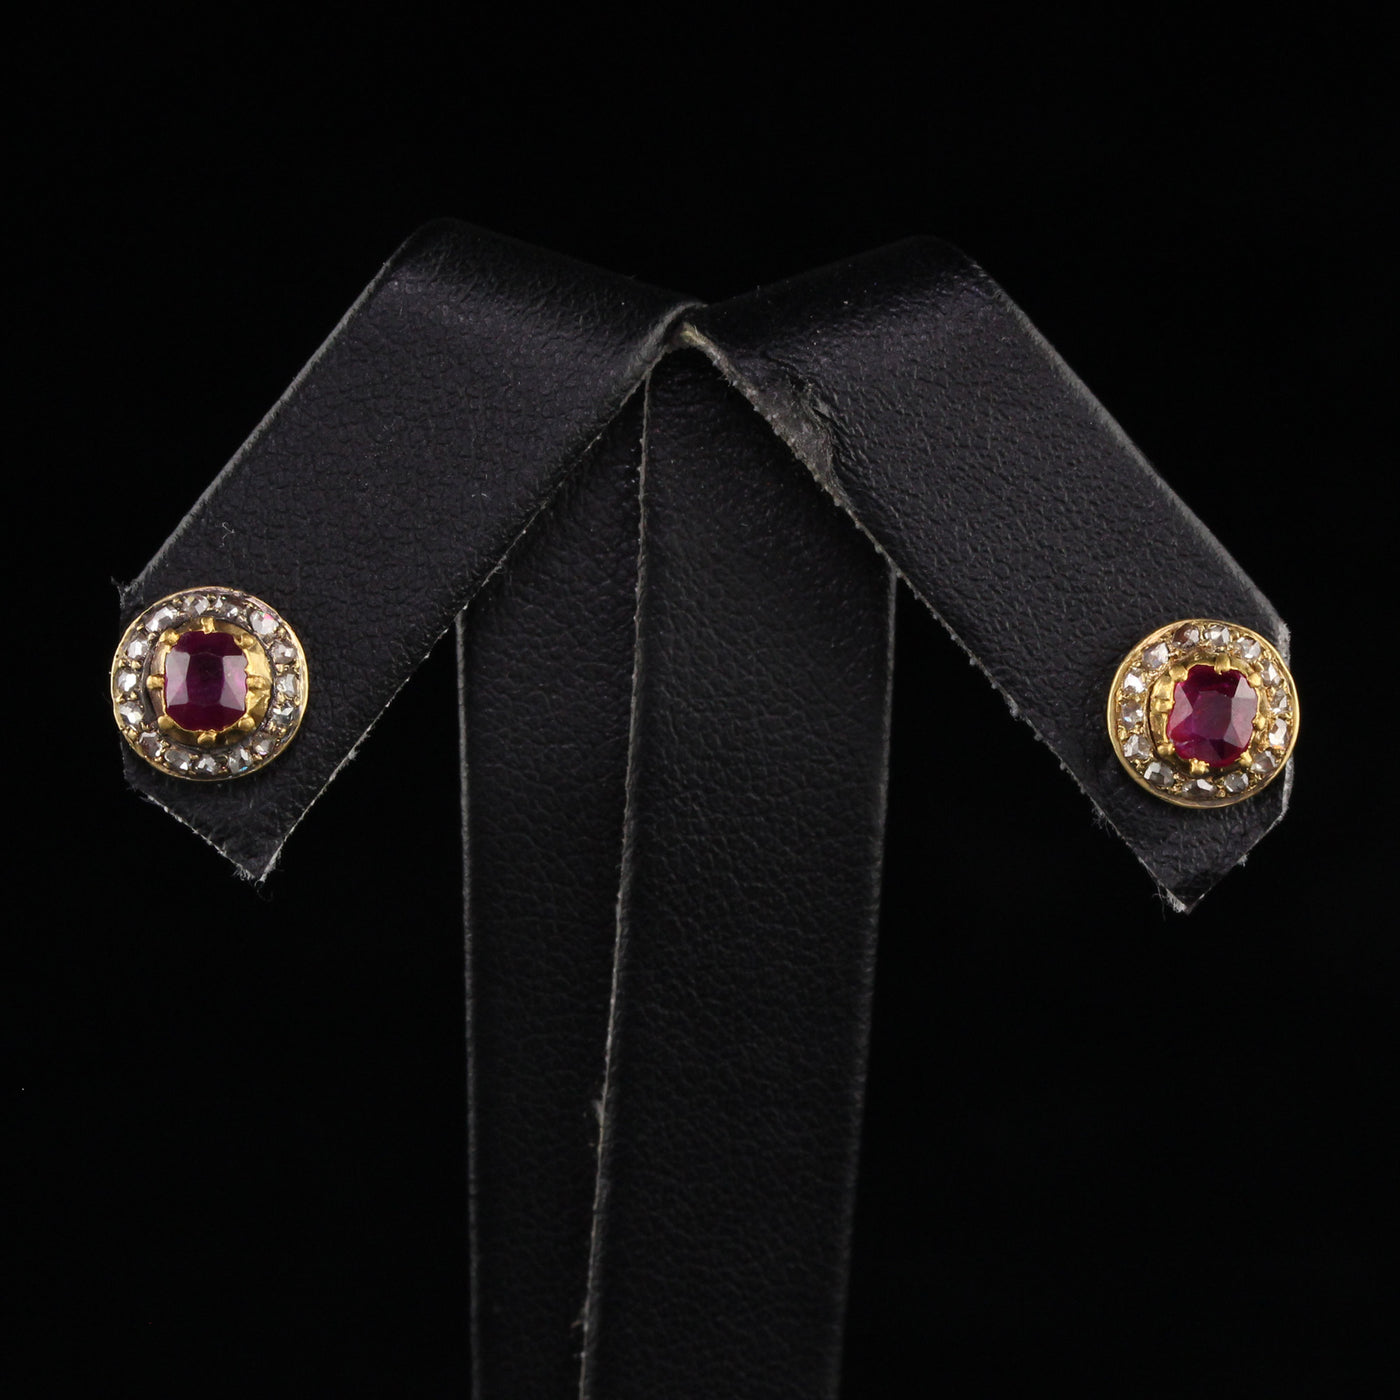 Antique Victorian 18K Yellow Gold Burma Ruby and Diamond Stud Earrings